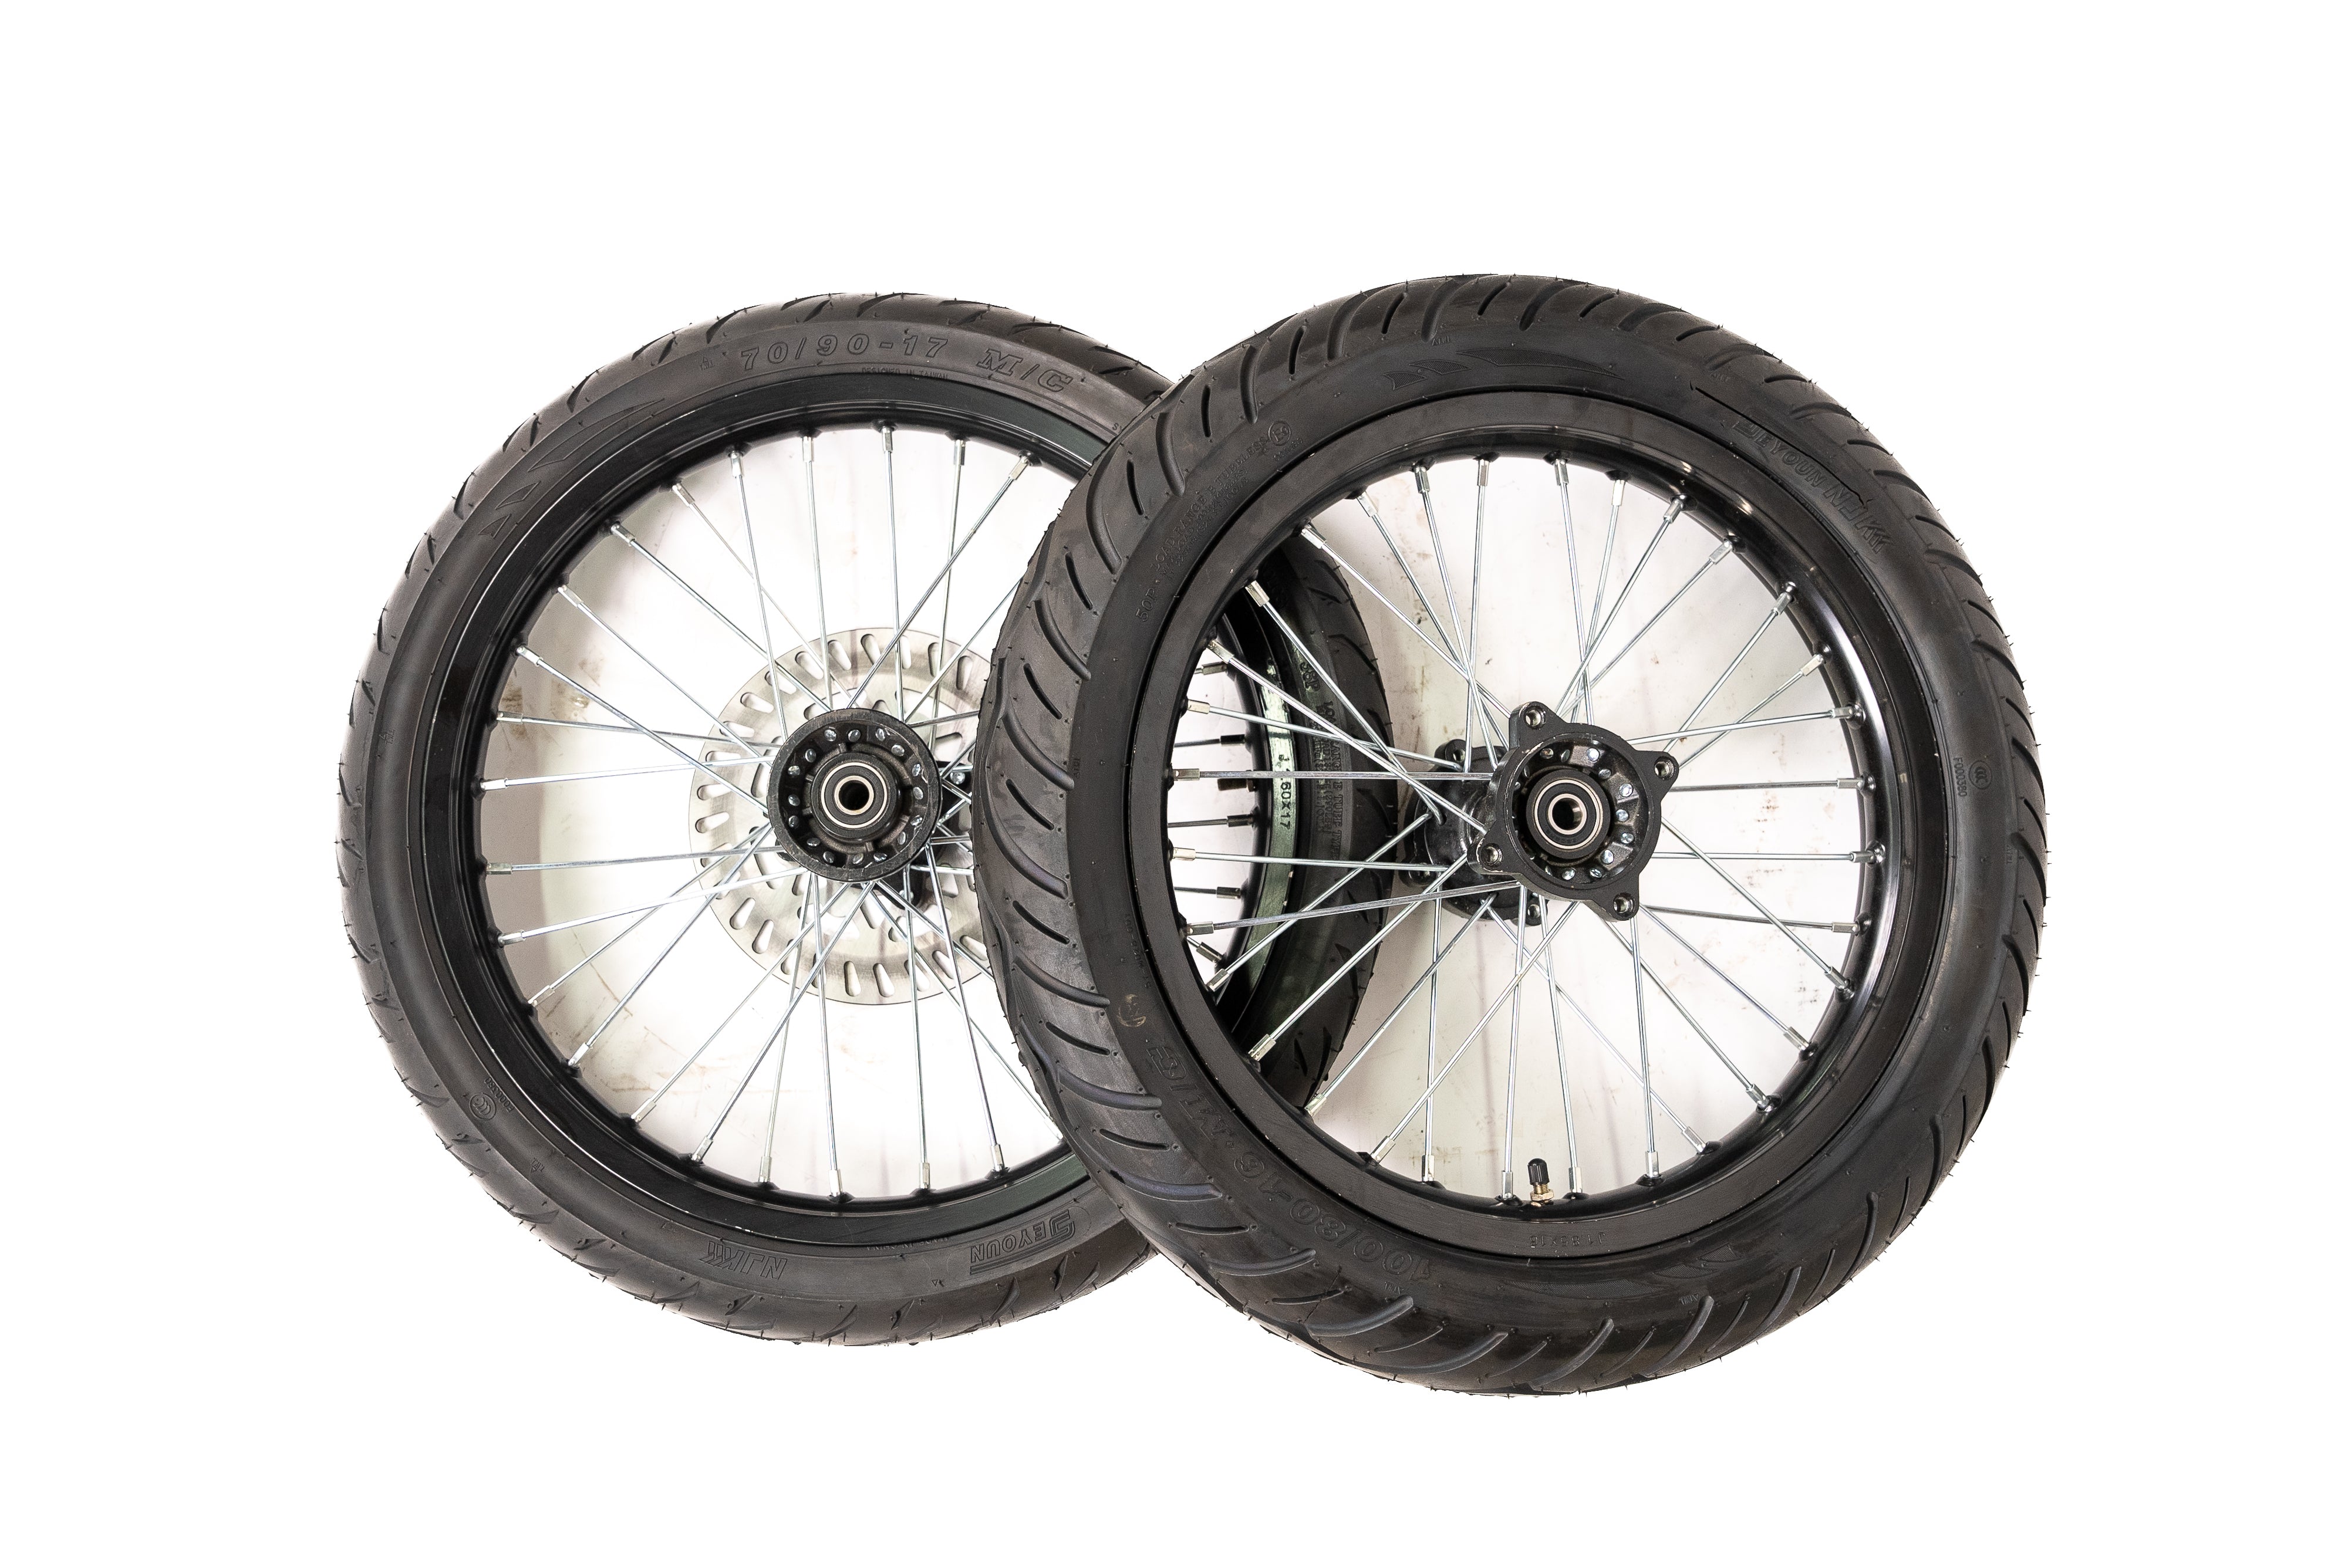 Xion Bike 16 inch rear wheel and 17 inch front wheel road tires